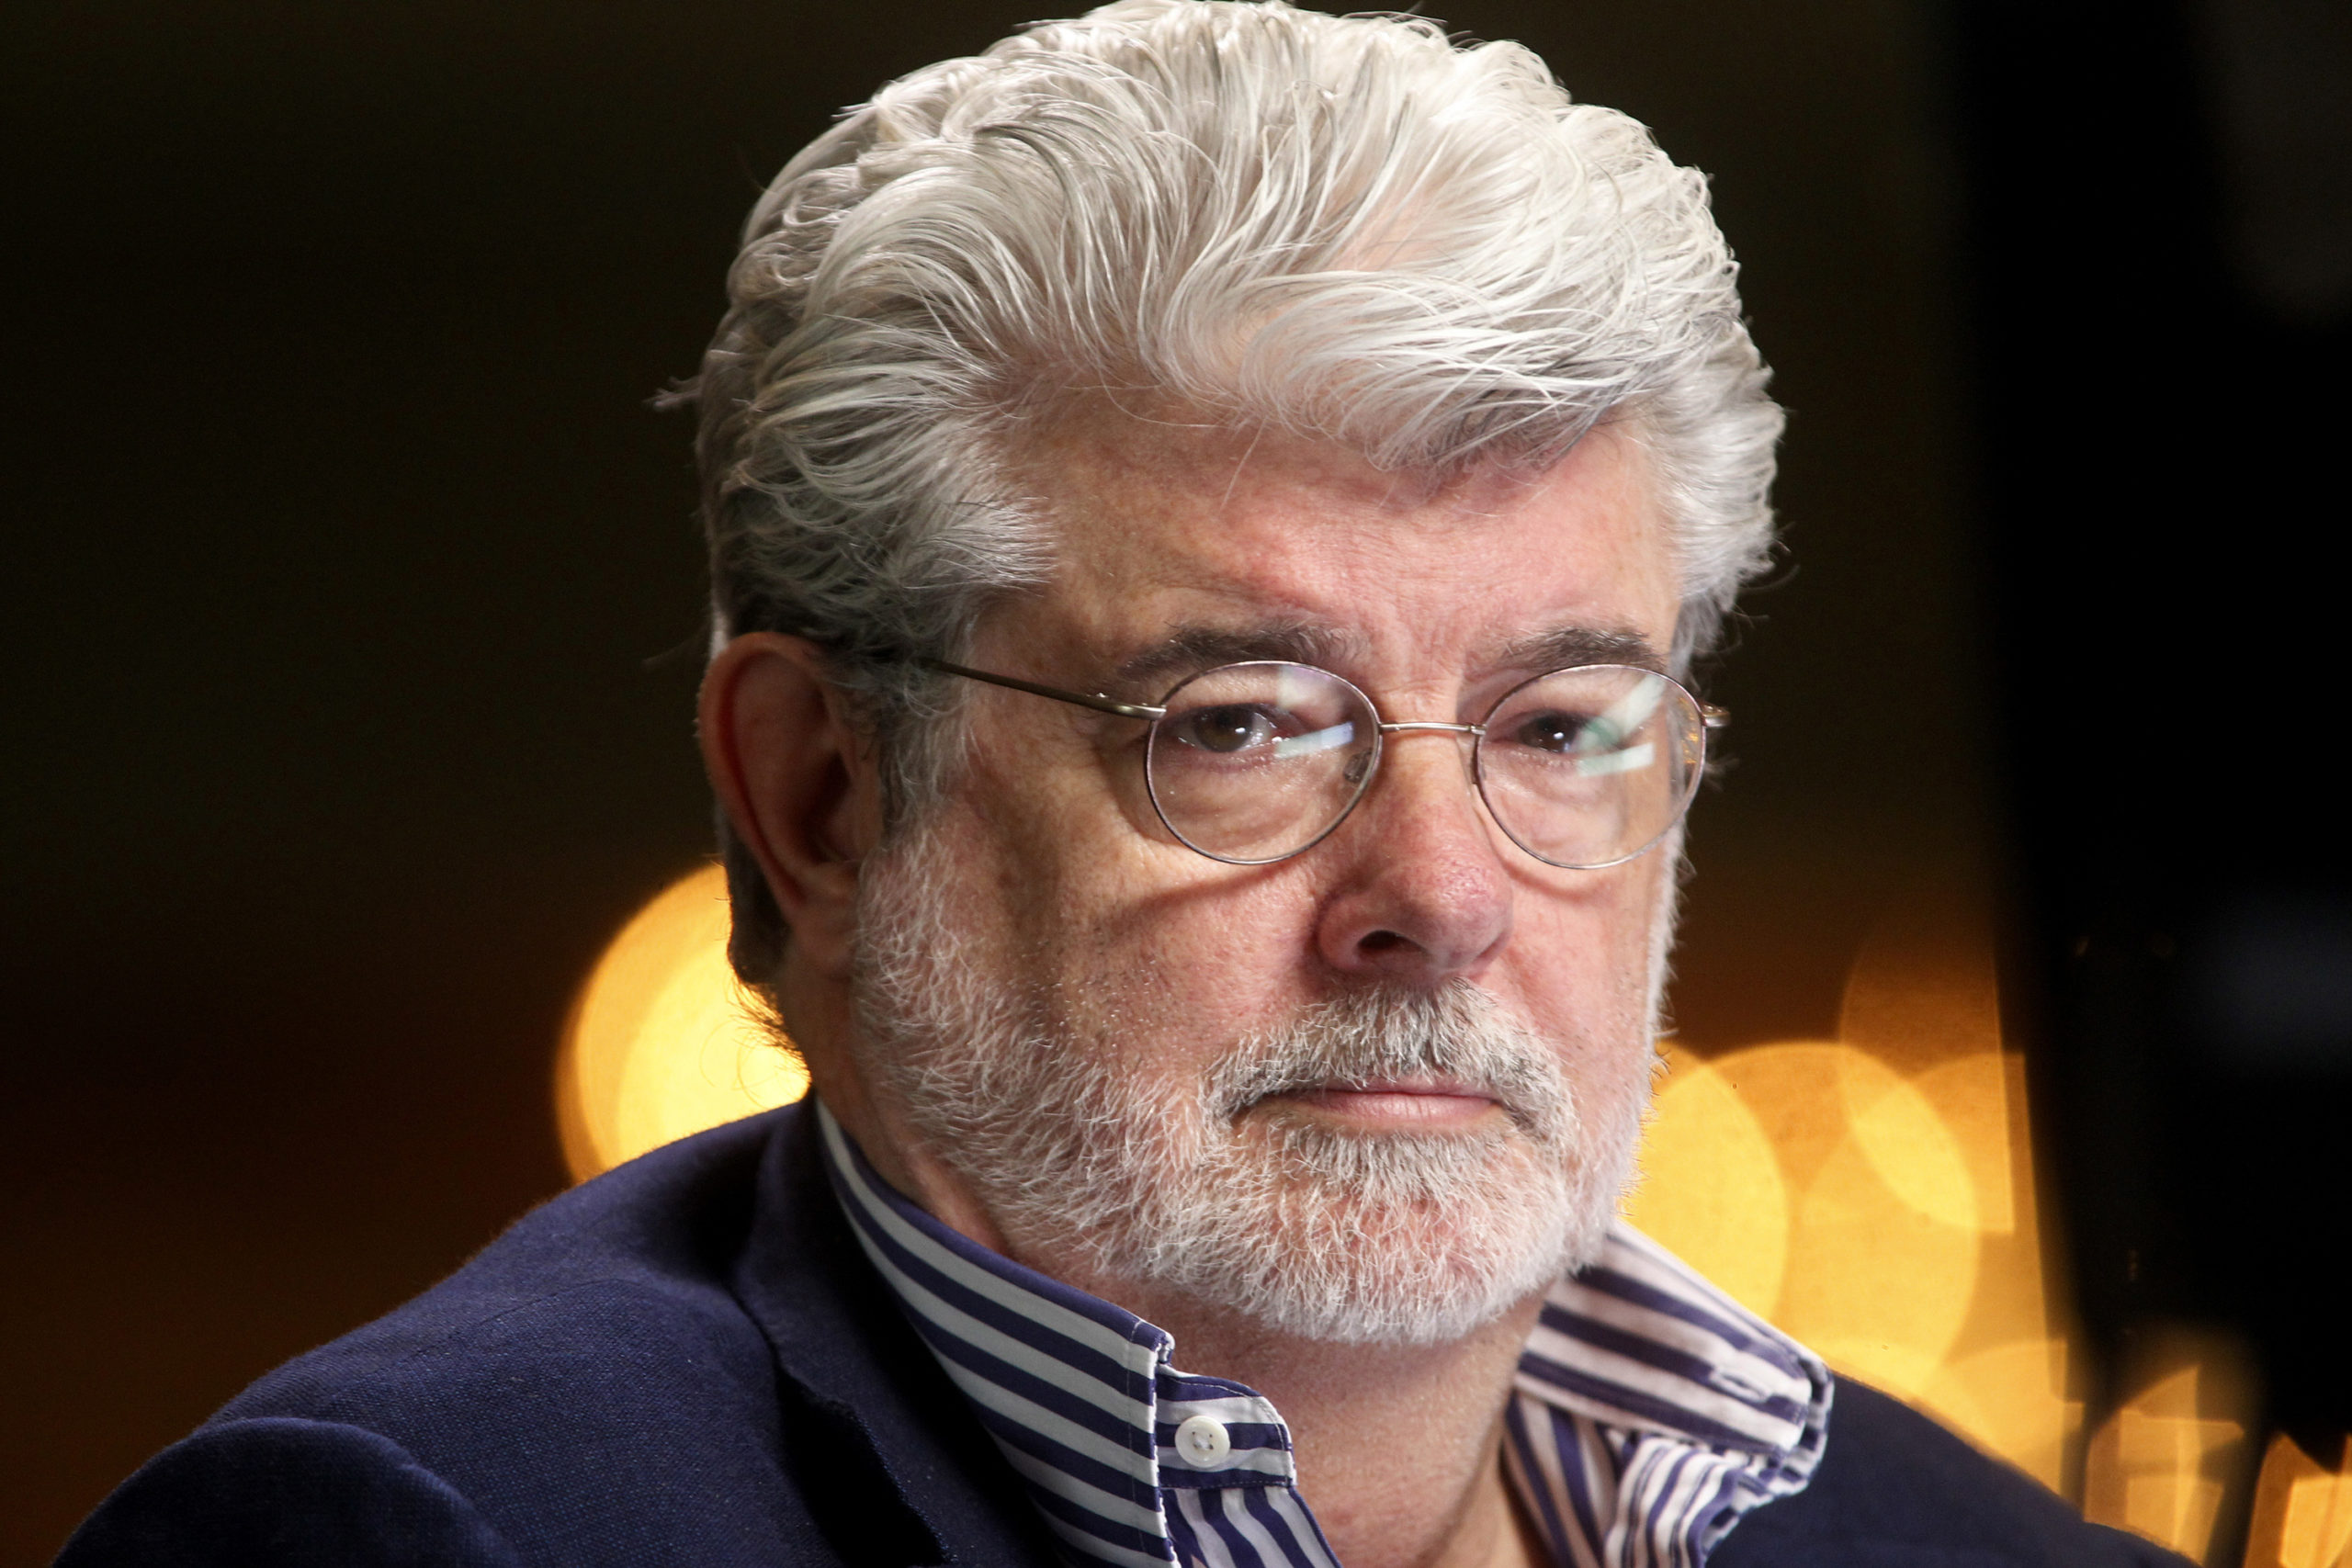 Filmmaker and Chairman of the Board of Lucasfilm Ltd. George Lucas waits to do a television interview at the Milken Institute Global Conference in Beverly Hills, California April 30, 2012. Walt Disney Co said it agreed to buy film maker George Lucas's Lucasfilm Ltd for $4.05 billion, according to news reports on October 30, 2012. Disney will pay about half in cash and issue about 40 million shares at closing for the acquisition of the film studio known for the iconic "Star Wars" movies. Picture taken April 30, 2012. REUTERS/Fred Prouser (UNITED STATES - Tags: BUSINESS ENTERTAINMENT MEDIA HEADSHOT) - RTR39SE4